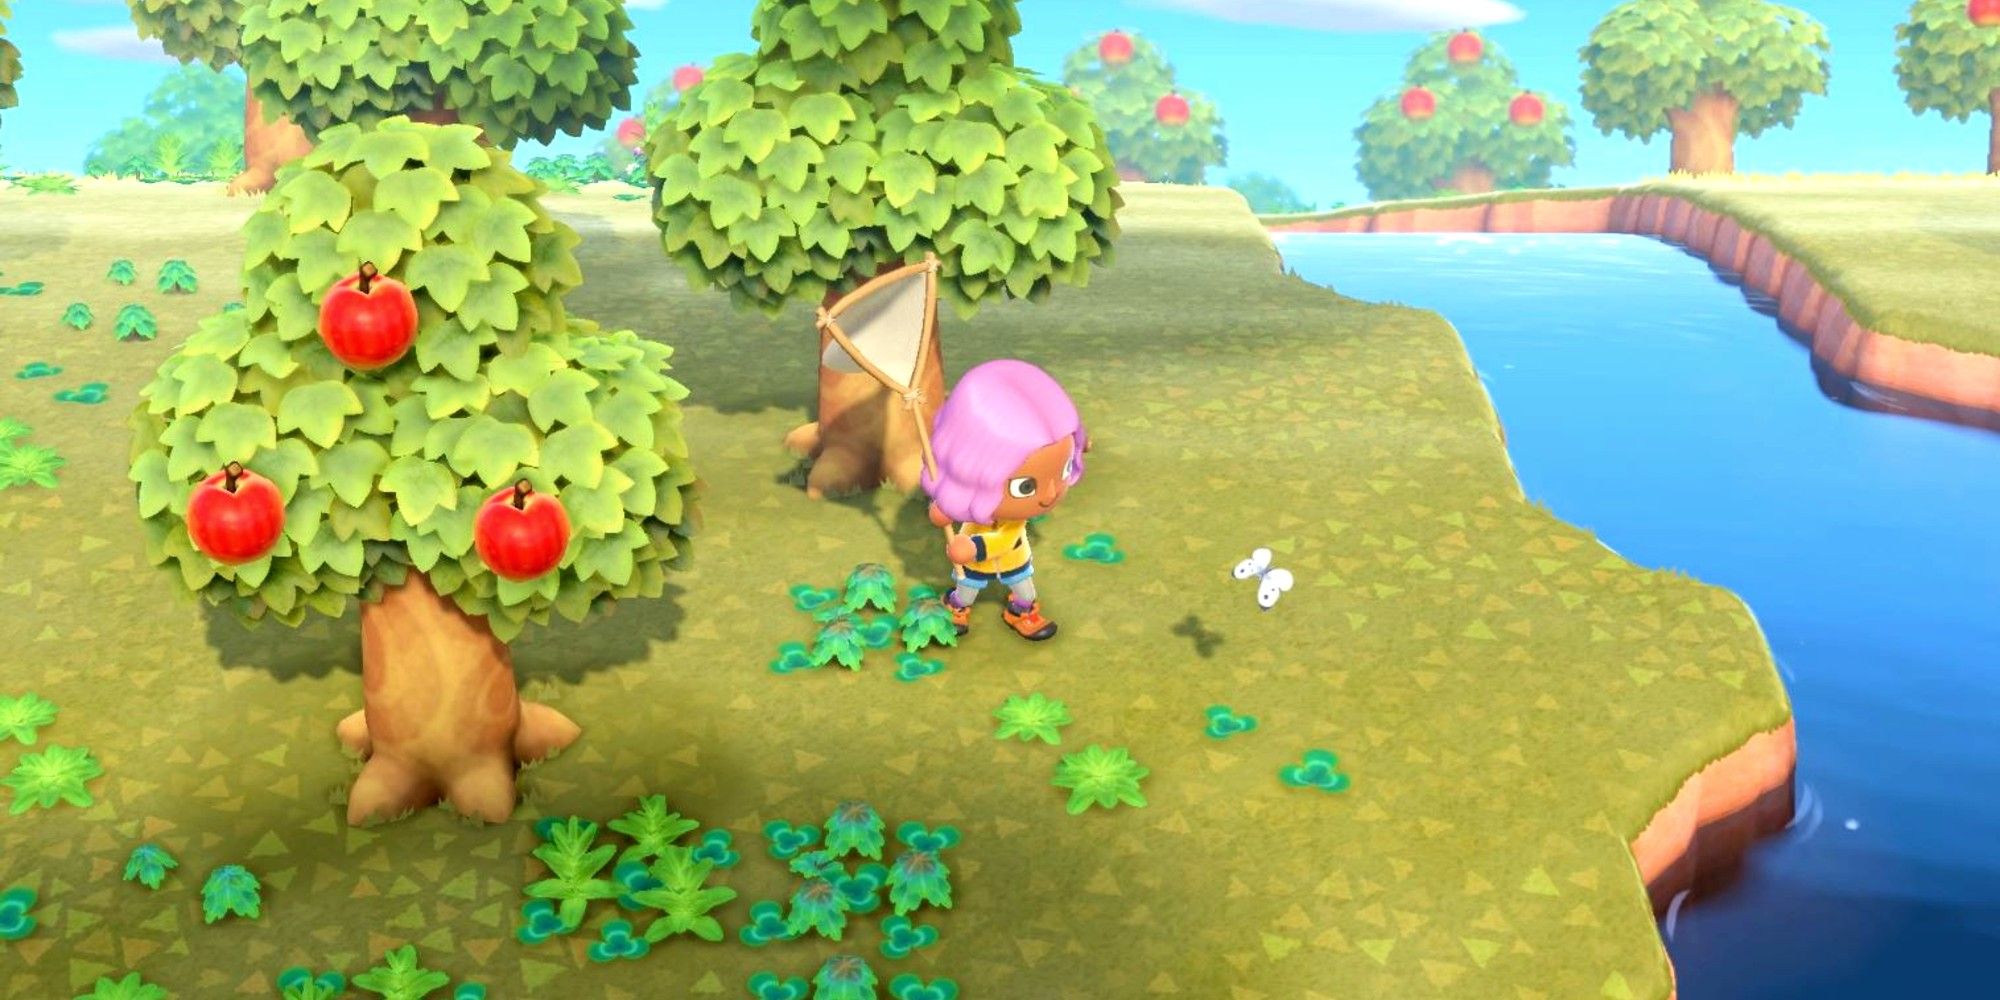 A player chases after a butterfly by the river in Animal Crossing: New Horizons